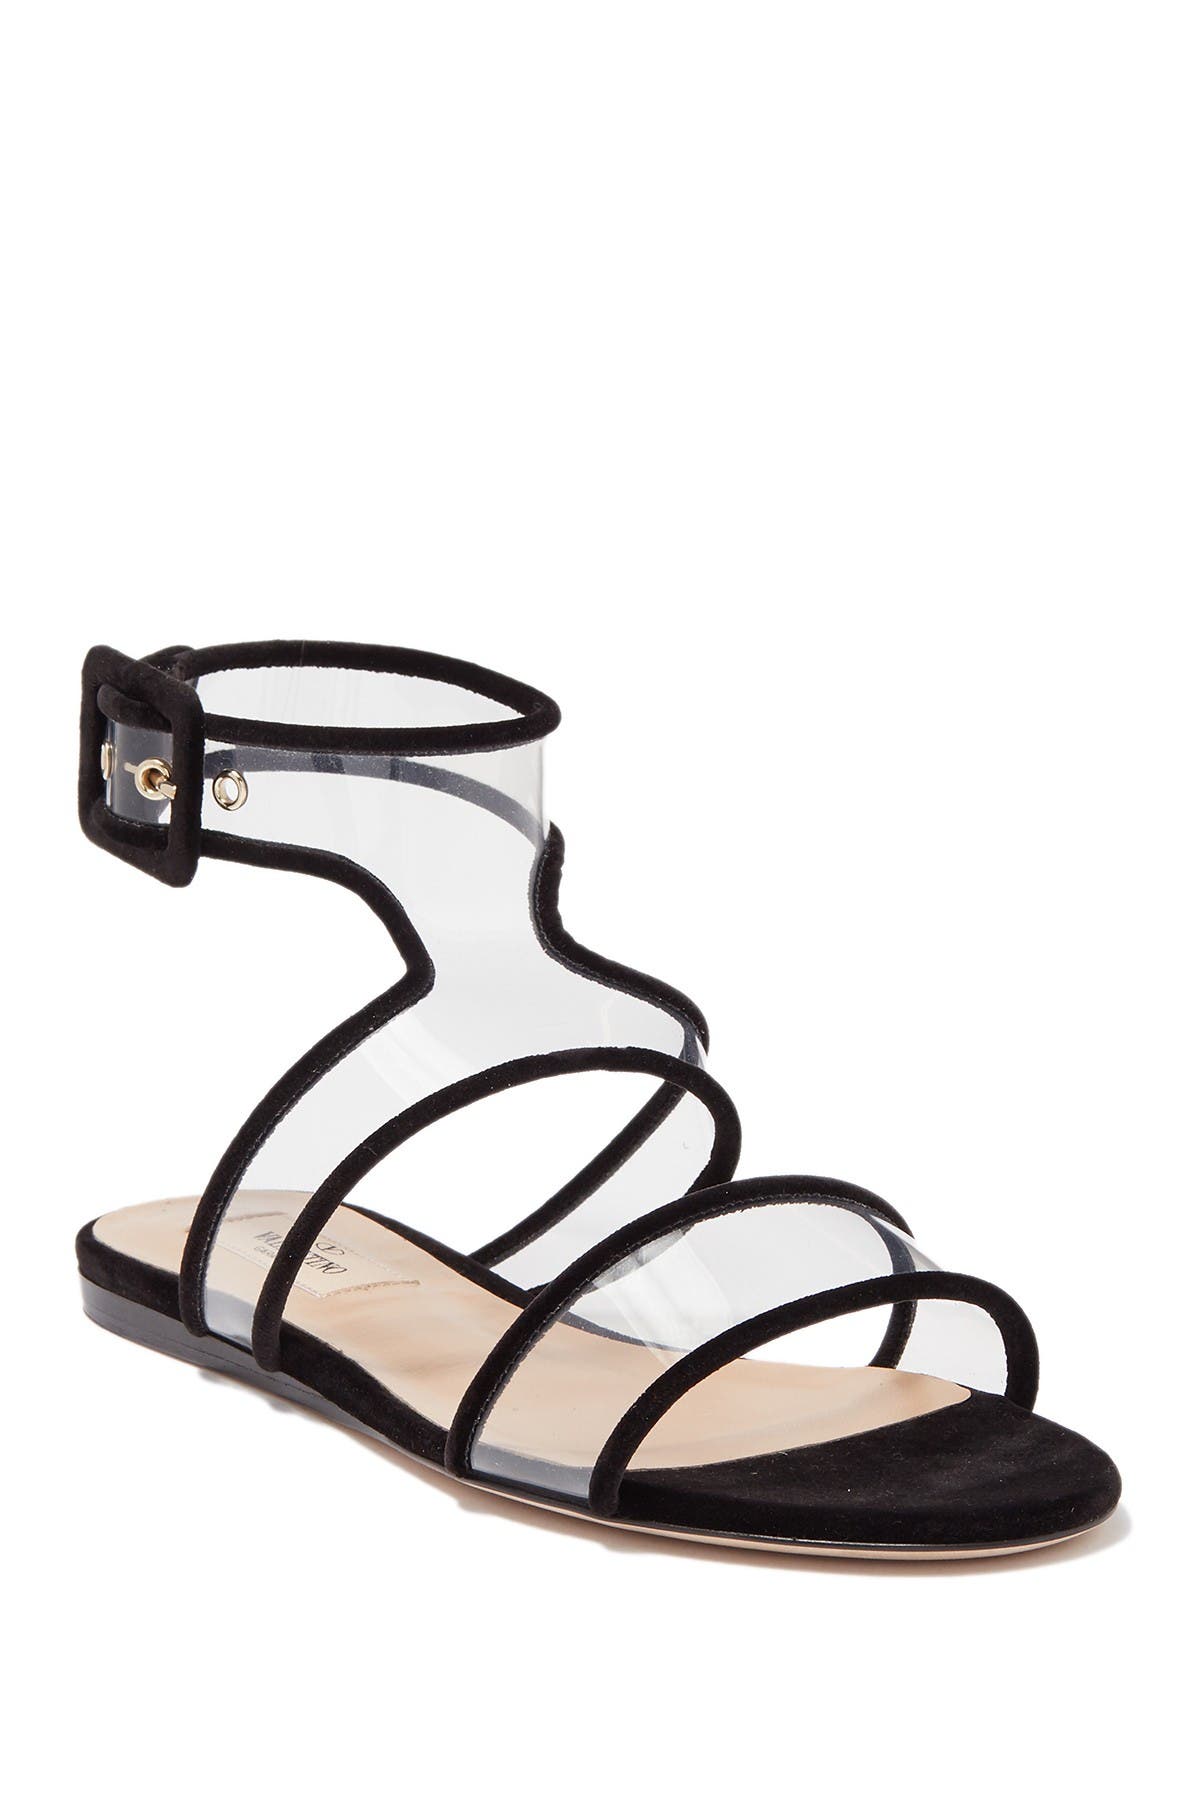 clear valentino sandals